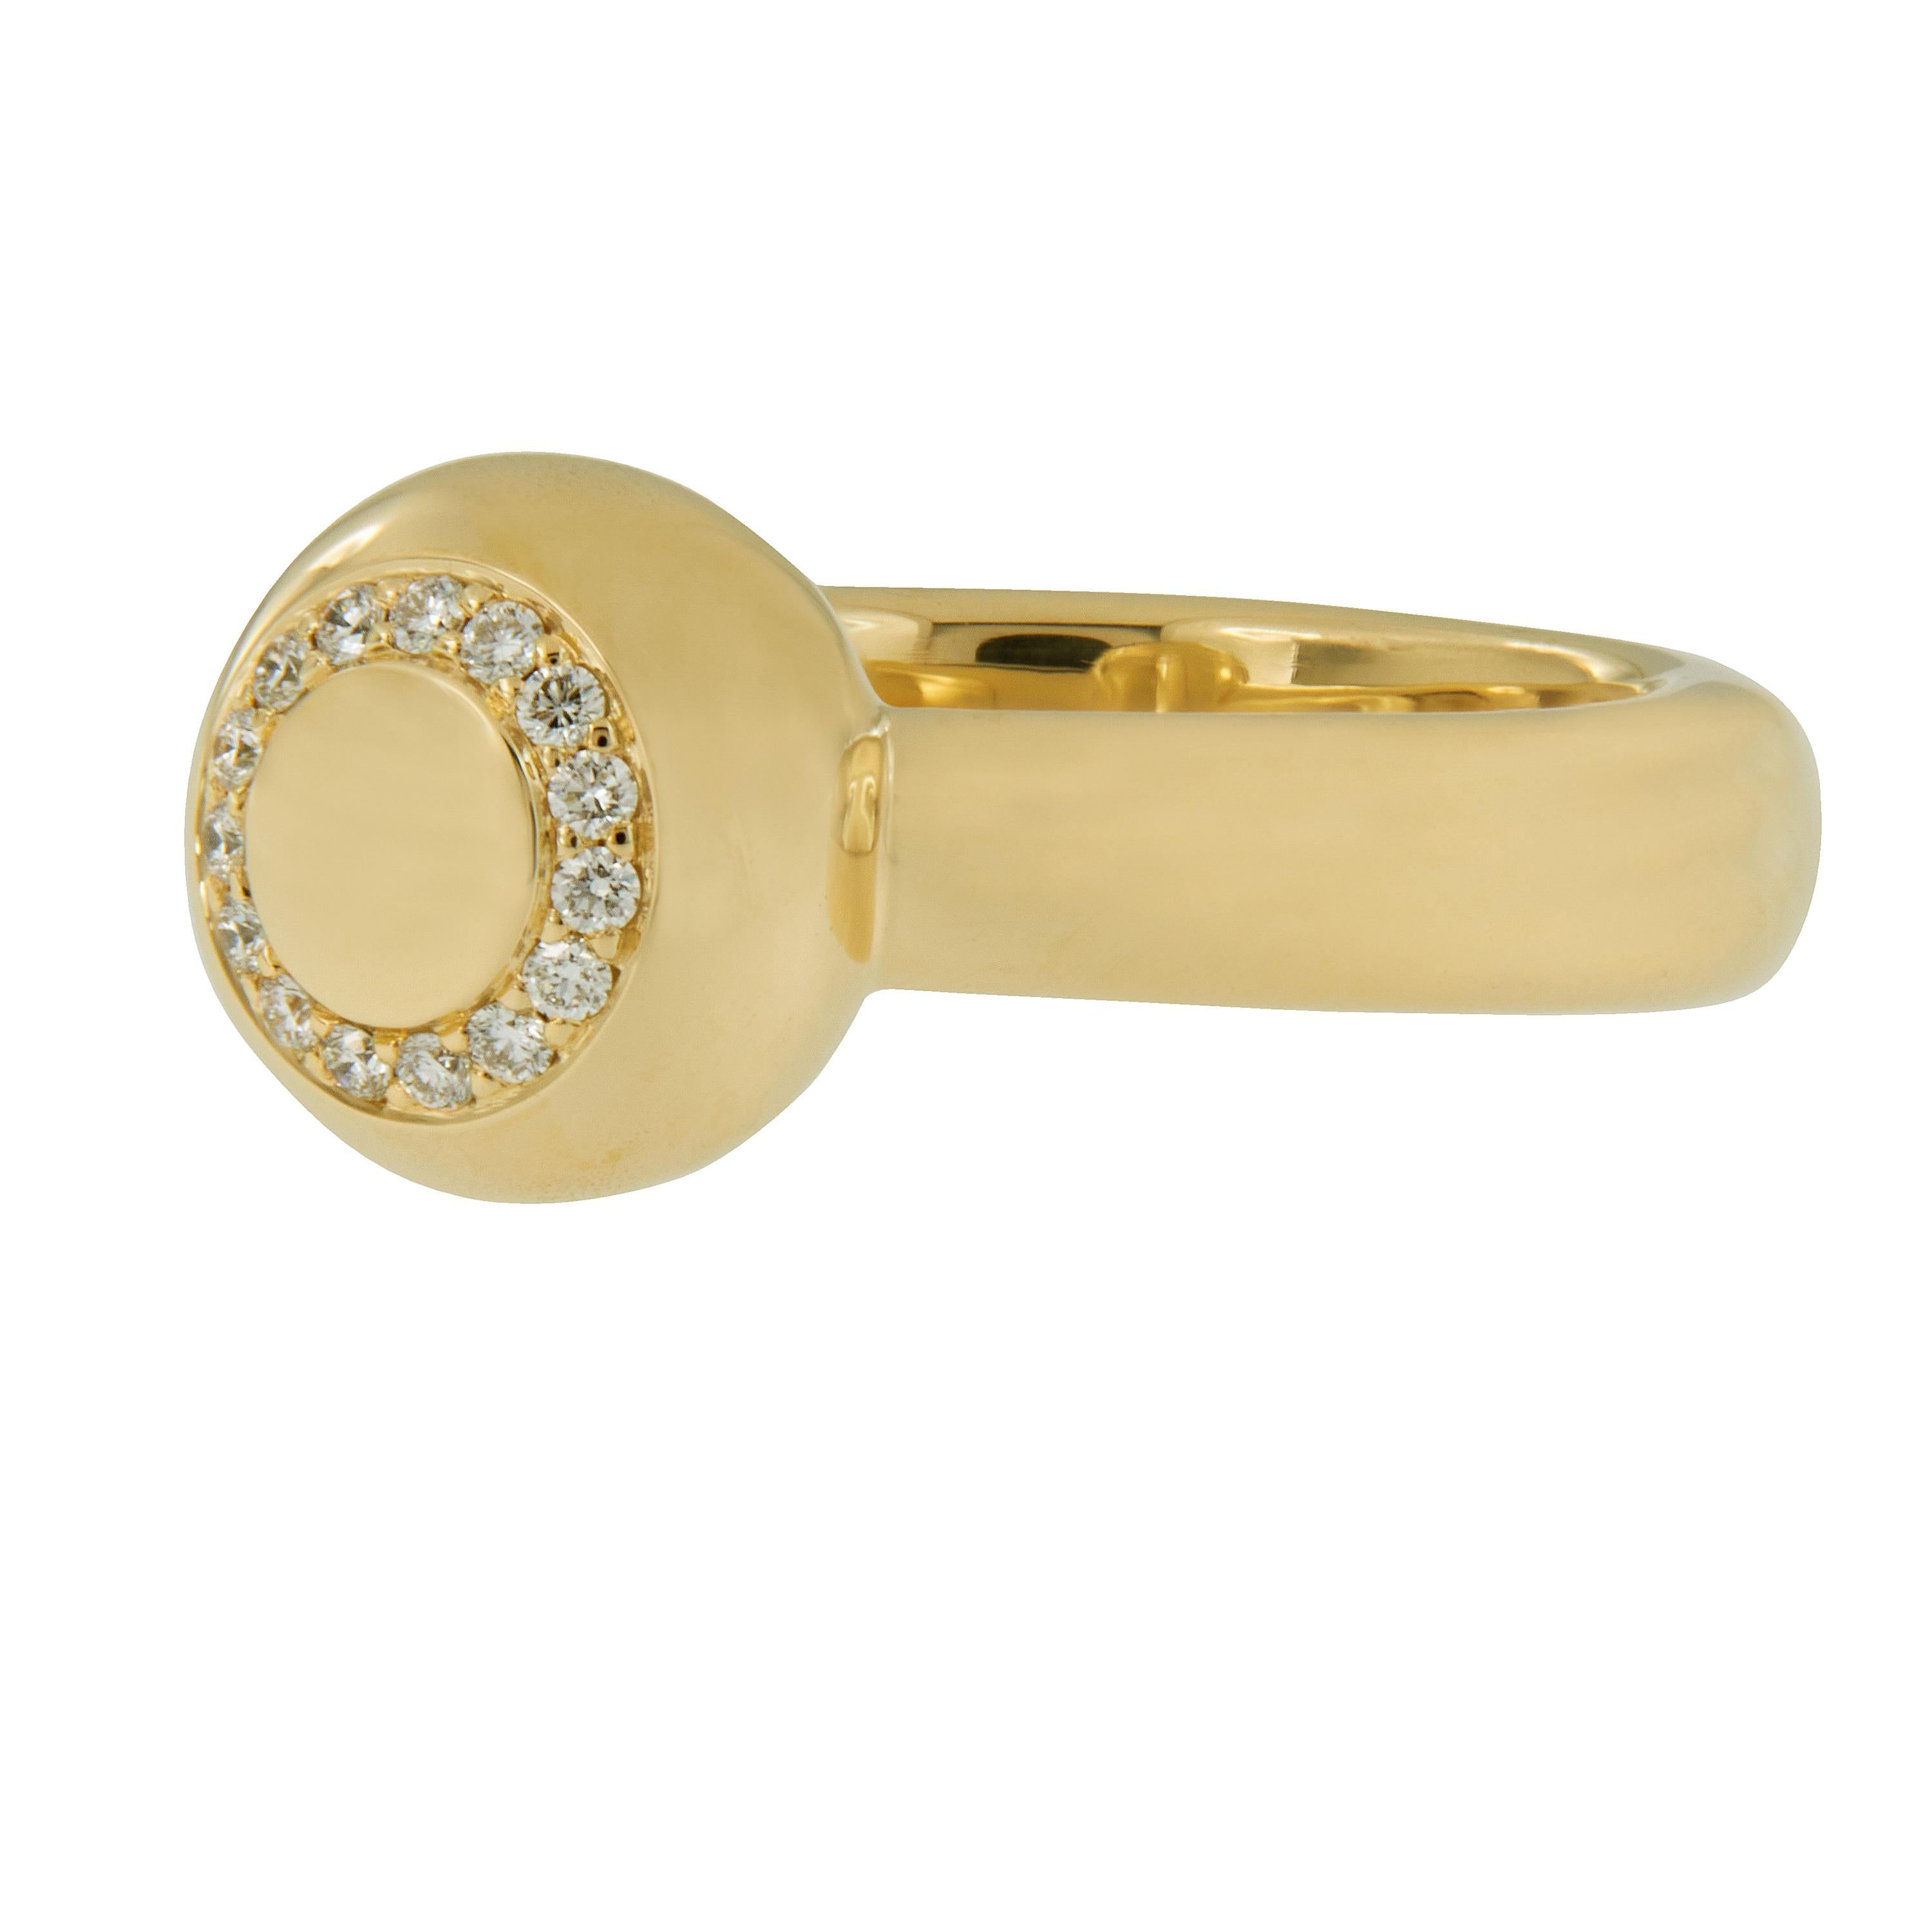 Since 1976, optimal quality and up-to-date design have always been the principles behind Scheffel-Schmuck. The clean, rounded look of this ring from their Bubbles Collection is truly eye catching! 18 Karat yellow gold rounded ring accented by 0.13